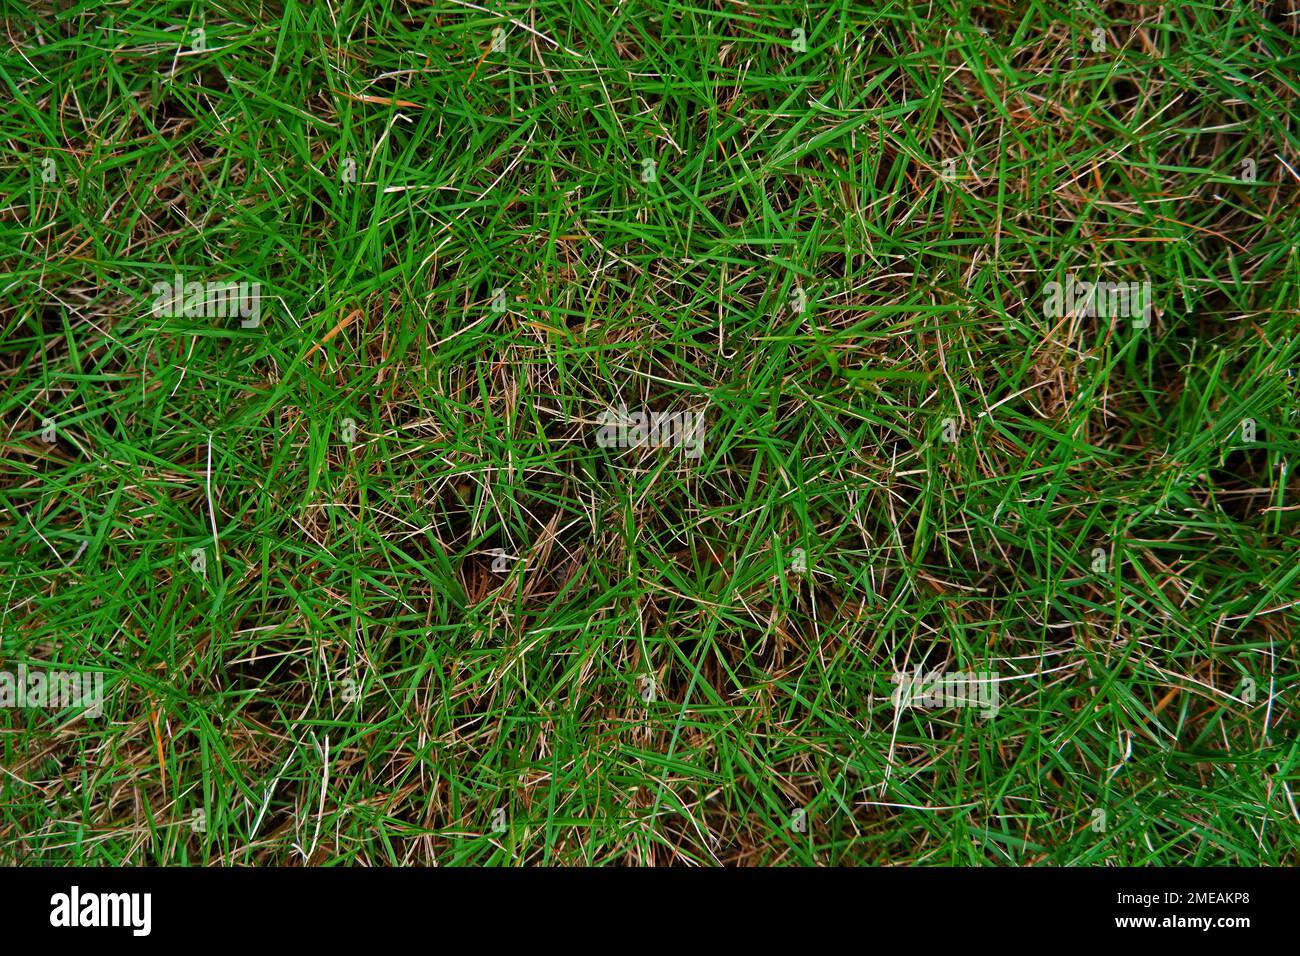 Close-up View Of Fresh Green Zoysia Japonica Grass Growing In The Yard Stock Photo